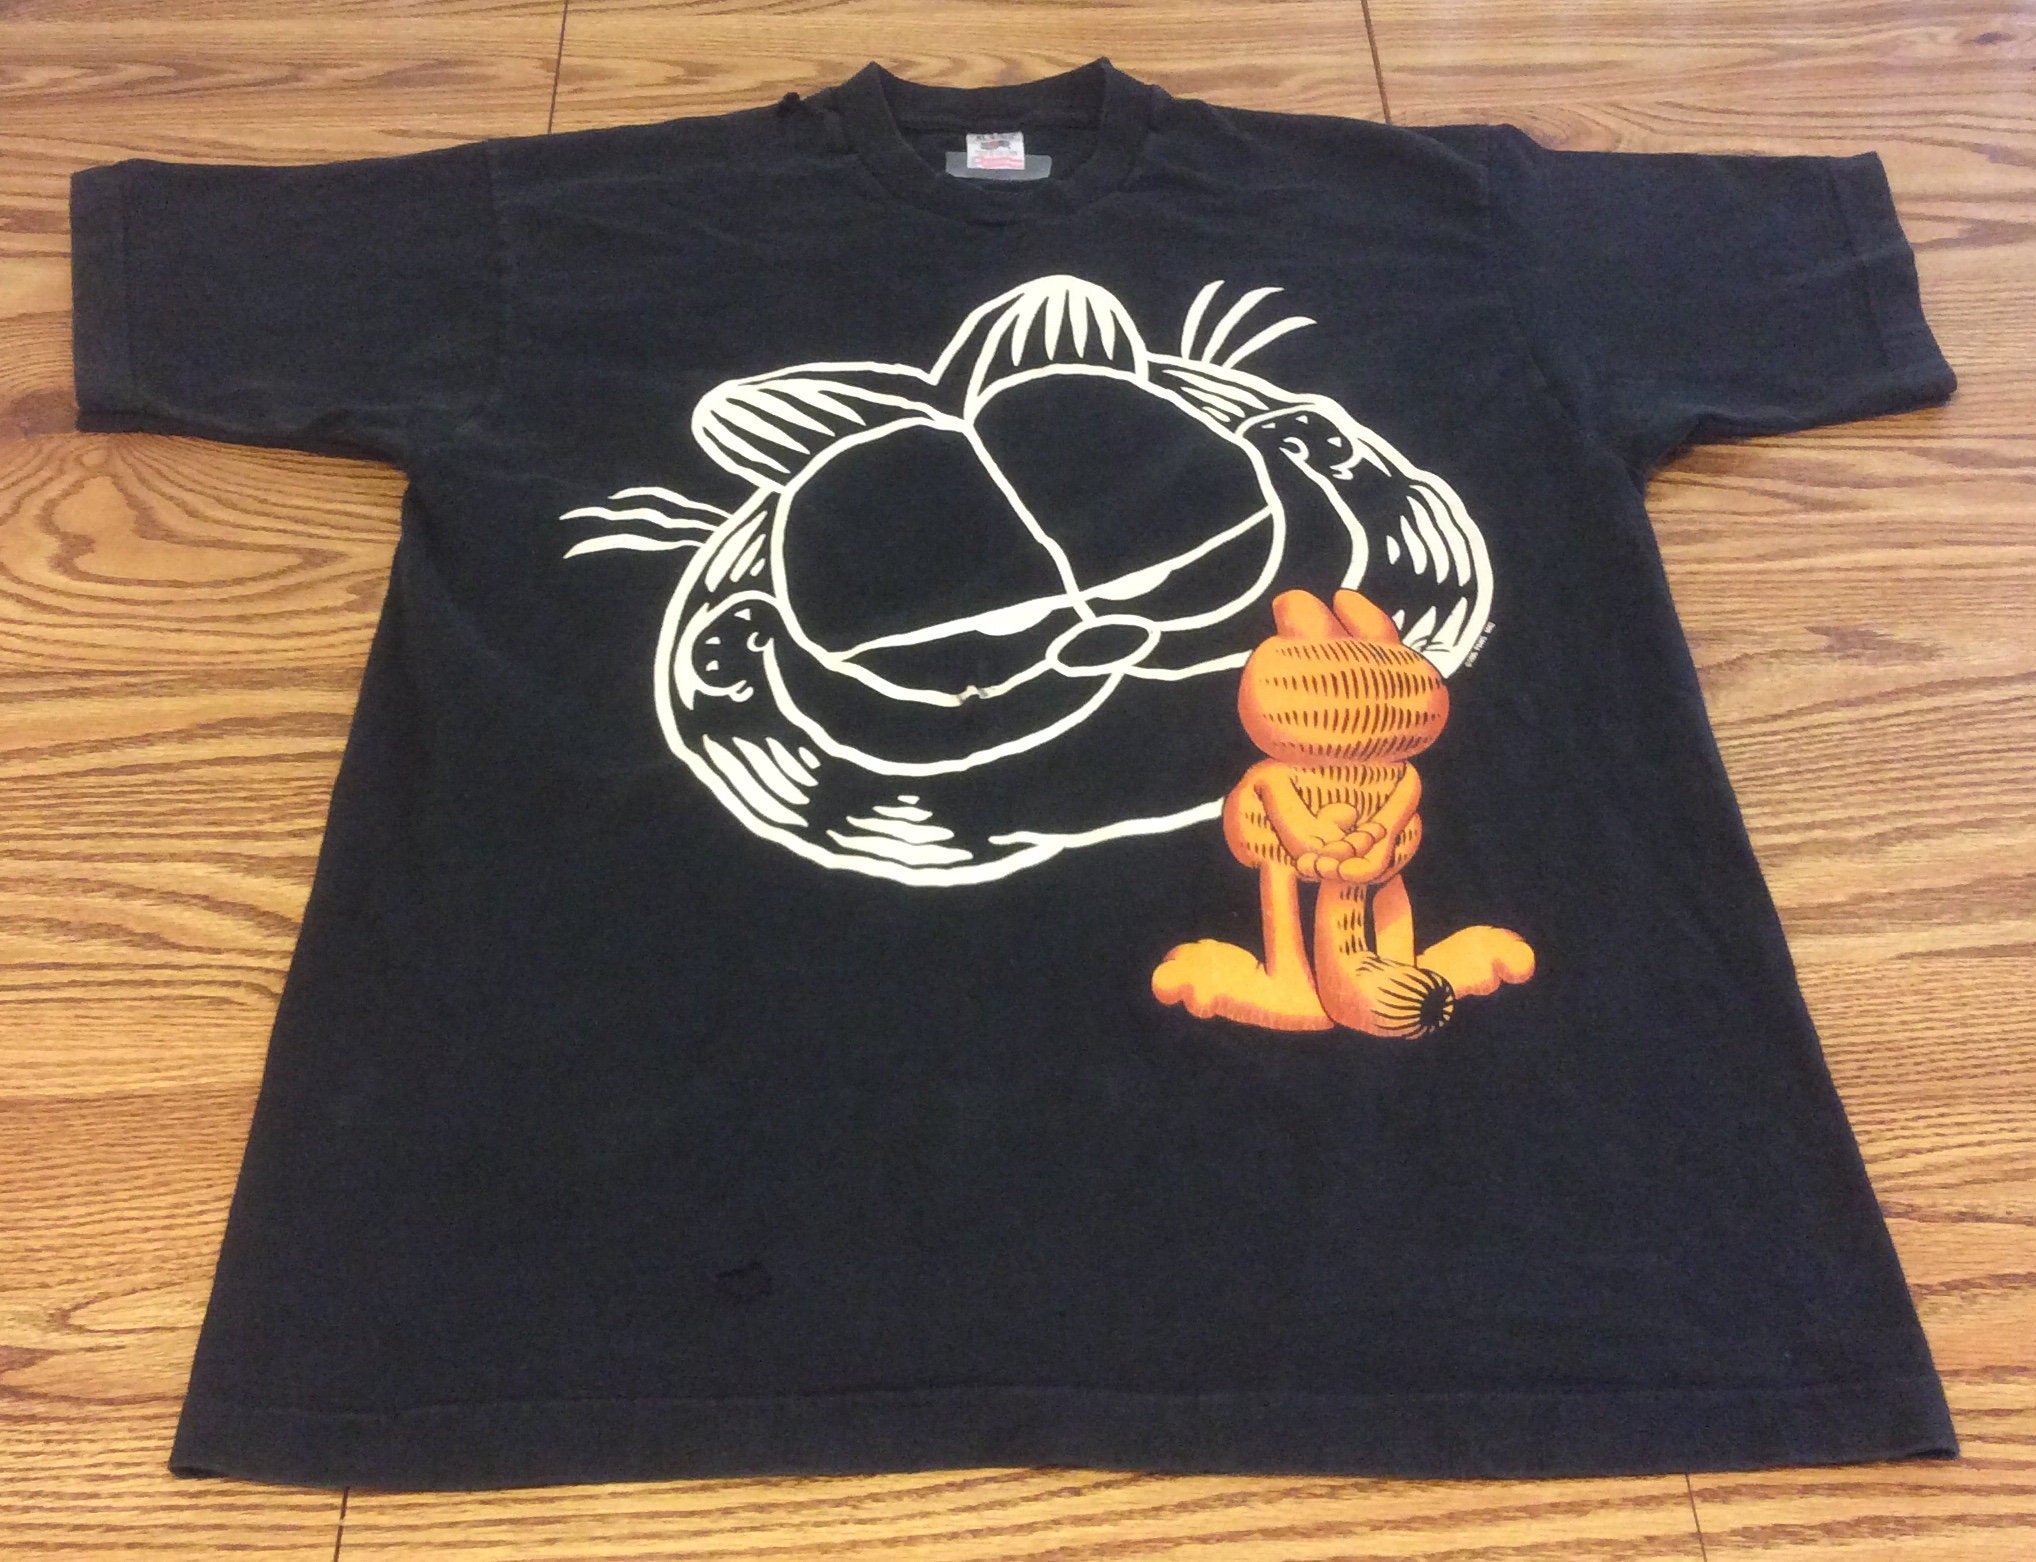 Stitch Loom Print Distressed Graphic XL of Single T Black Etsy Fruit Garfield Size - Large Shirt Vintage the 1995 Paws